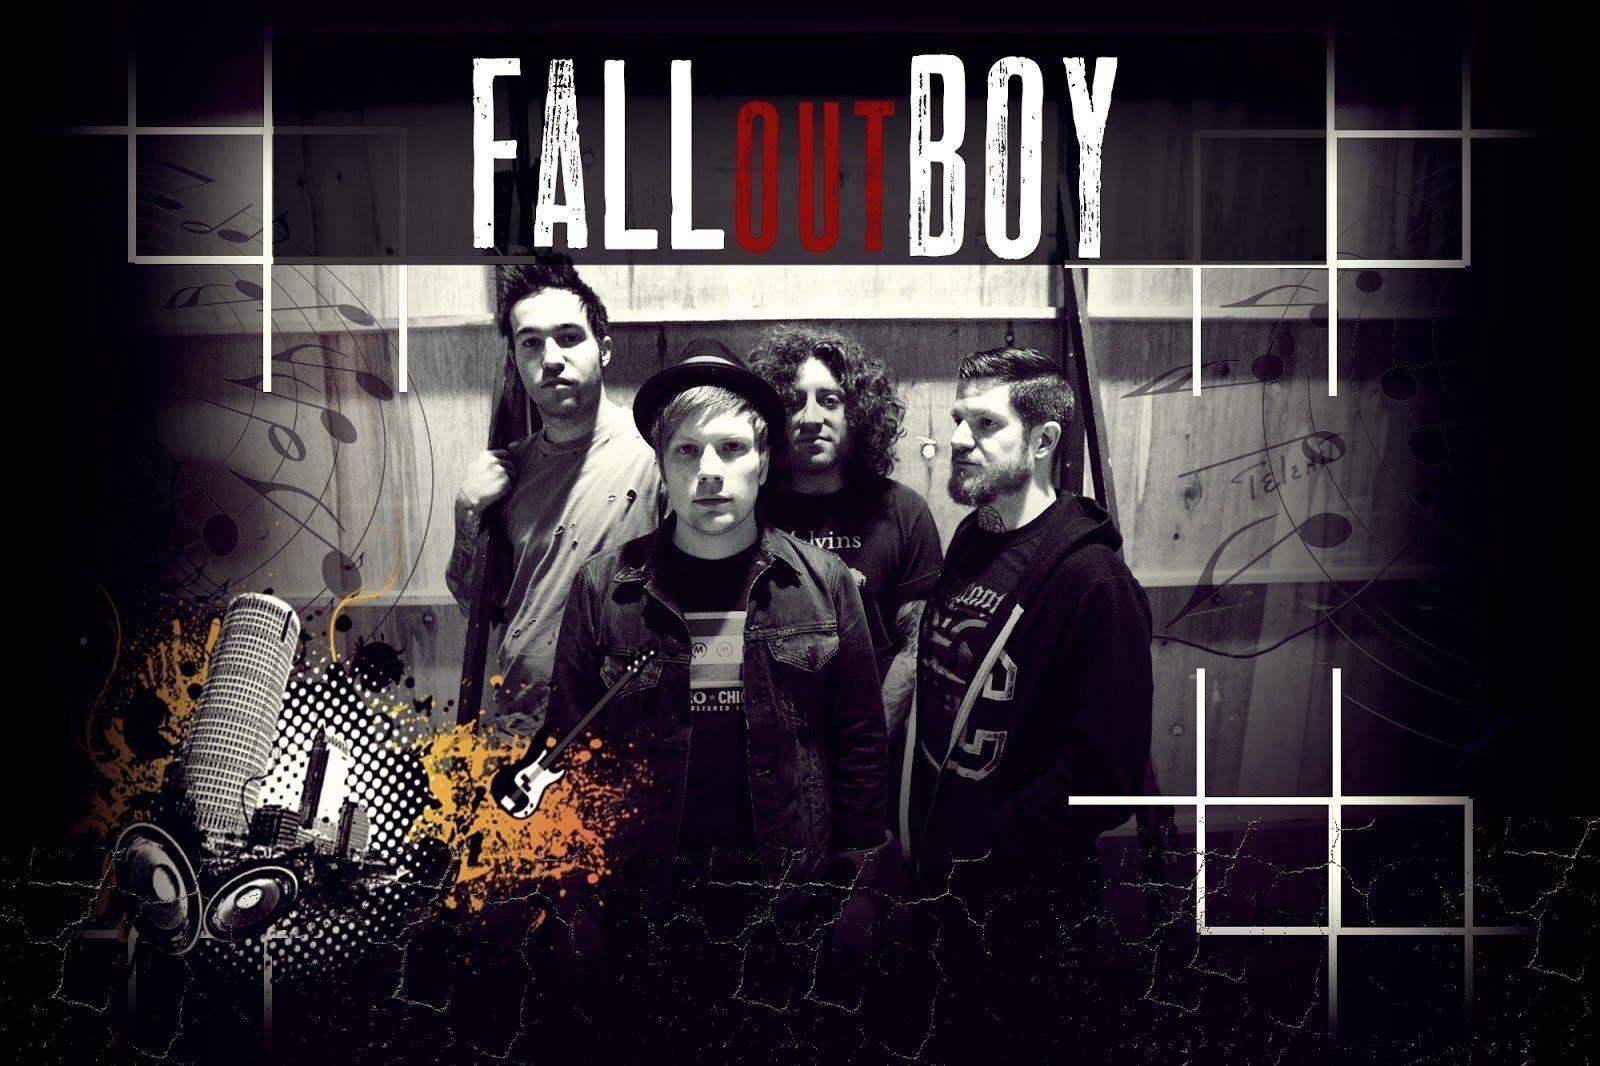 Fall Out Boy FOB Obsession Out Boy Obsession